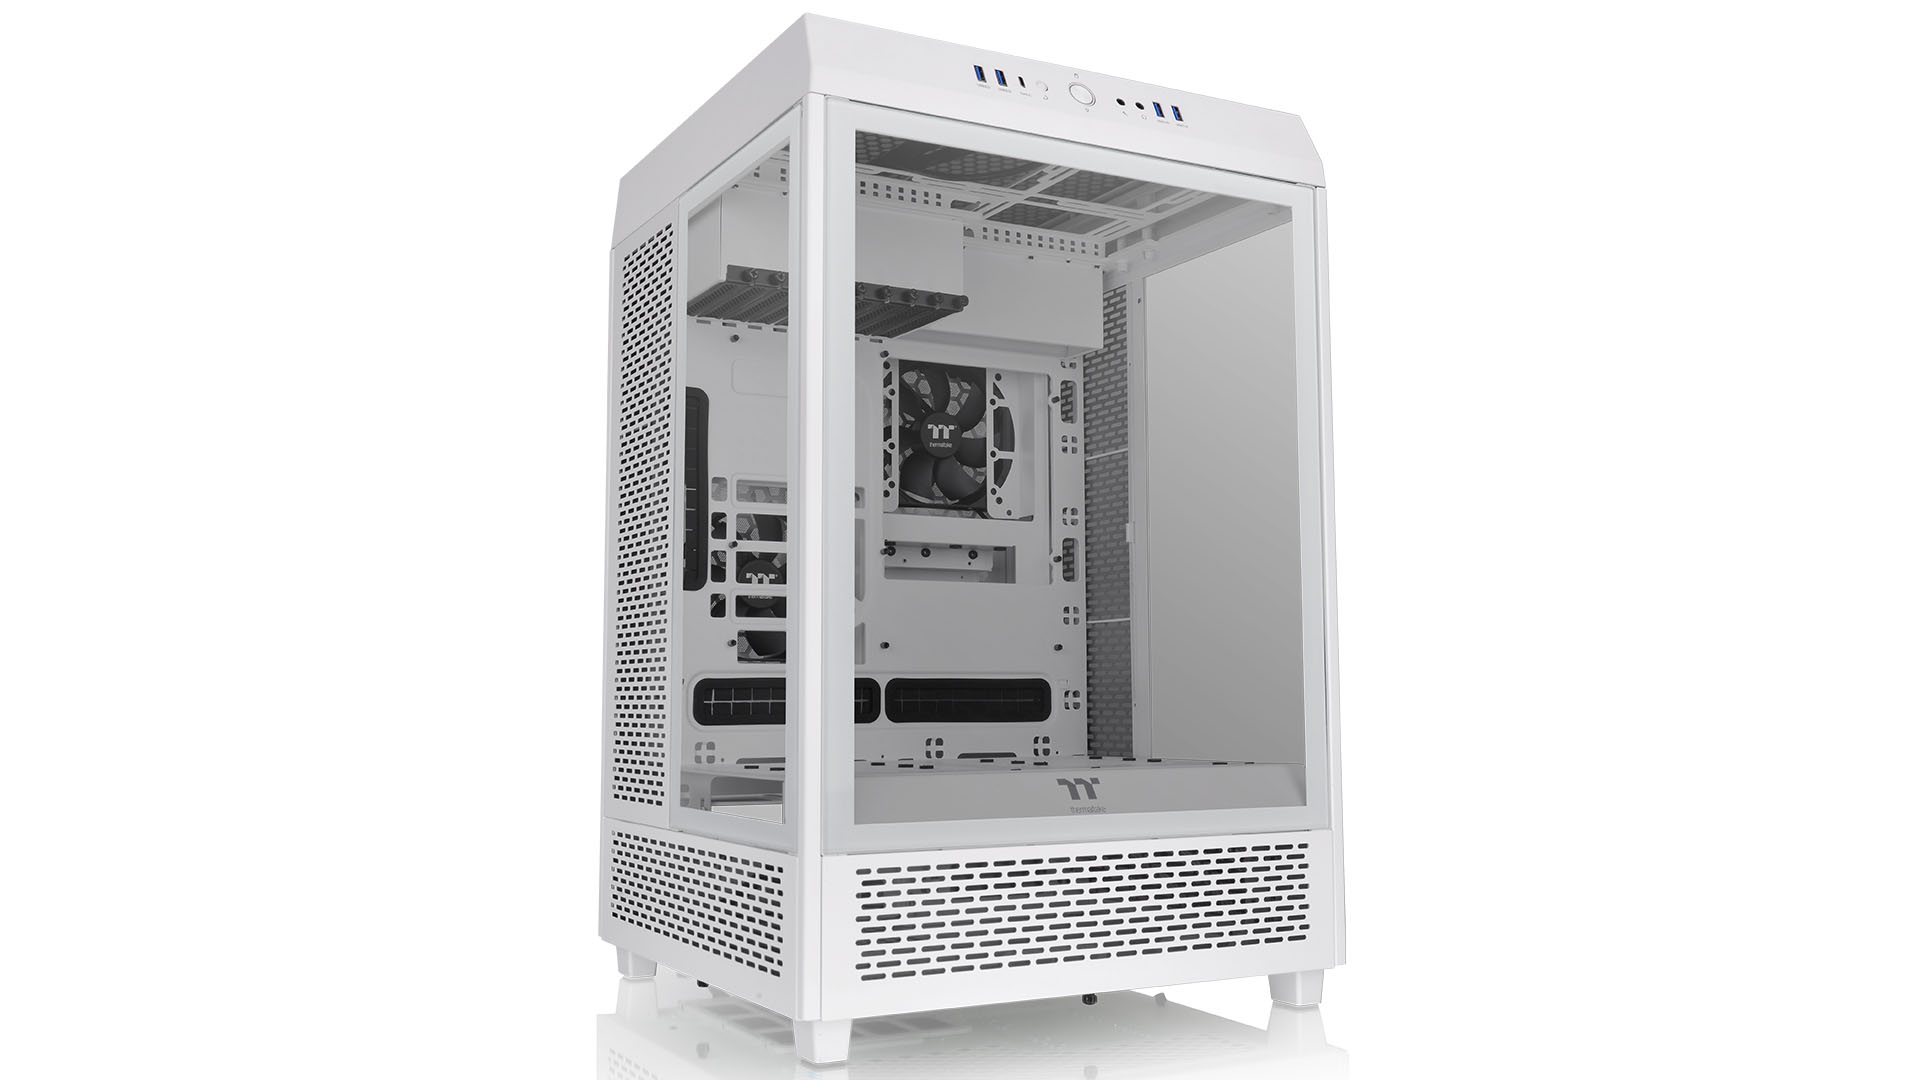 Thermaltake Tower 500 review image showing the front of the case against a white background.